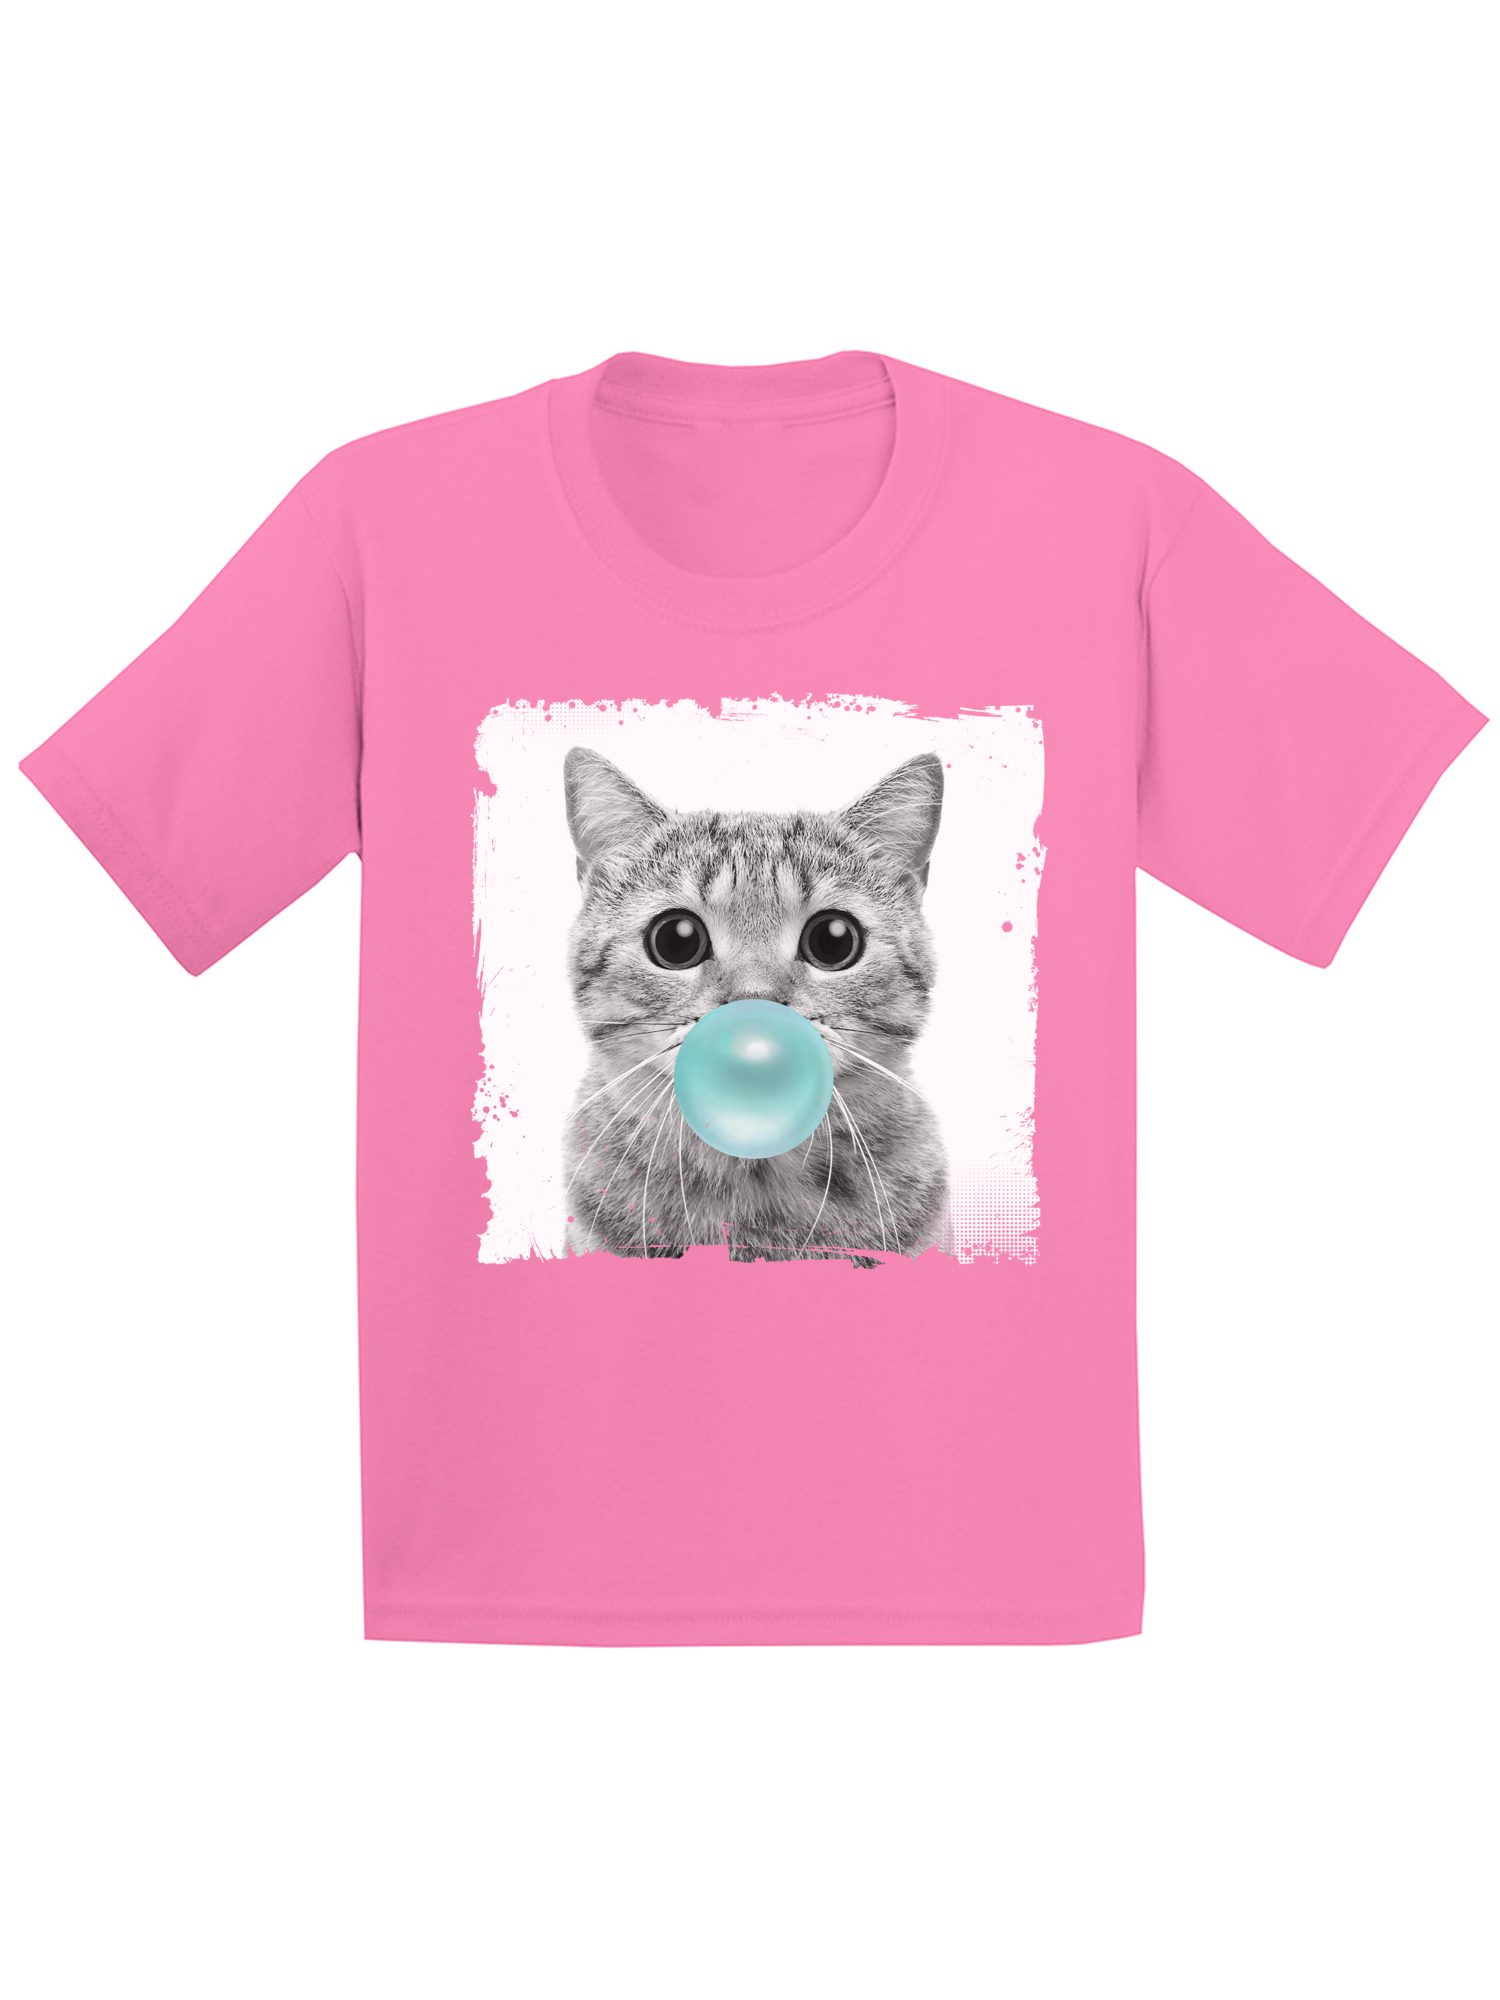 Awkward Styles Cat Blowing Blue Gum Shirt Cat Lovers Lovely Gifts for Kids Funny Animal Youth Shirt Cute Animal Lovers Clothes New Kids T Shirt Gifts for Kids Little Cat Clothing Childrens Outfit - image 1 of 4